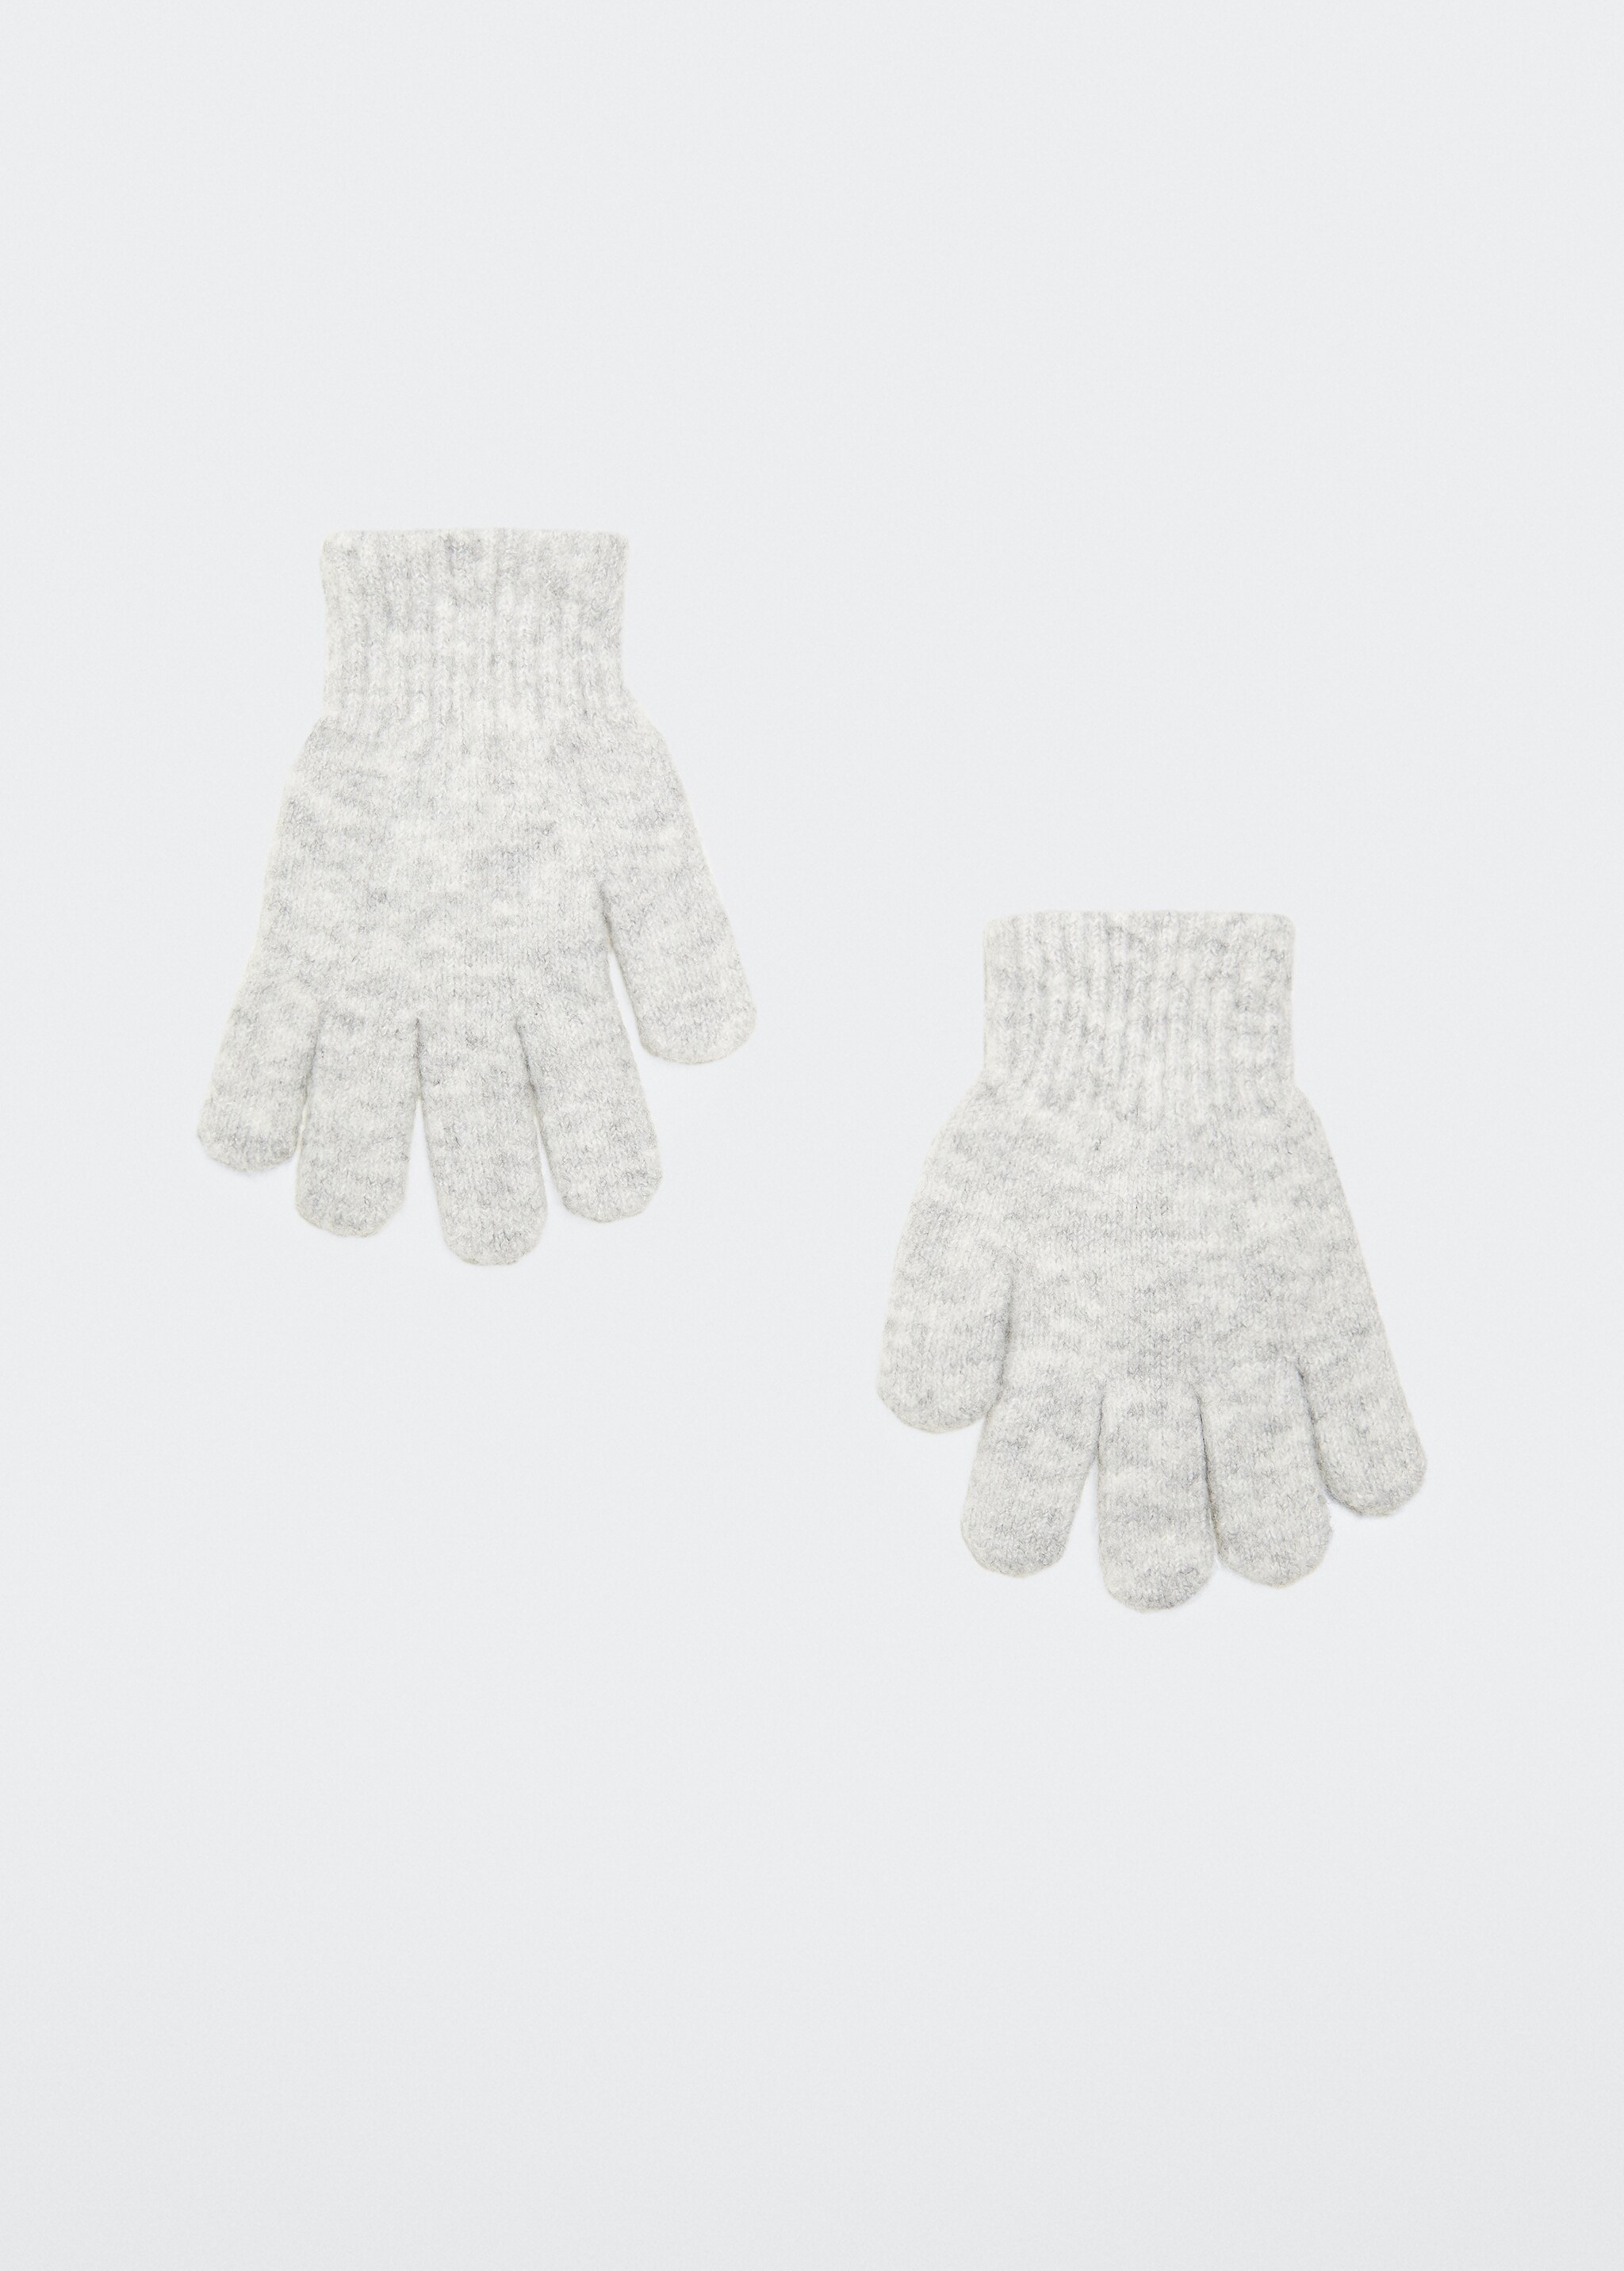 Knit gloves - Article without model